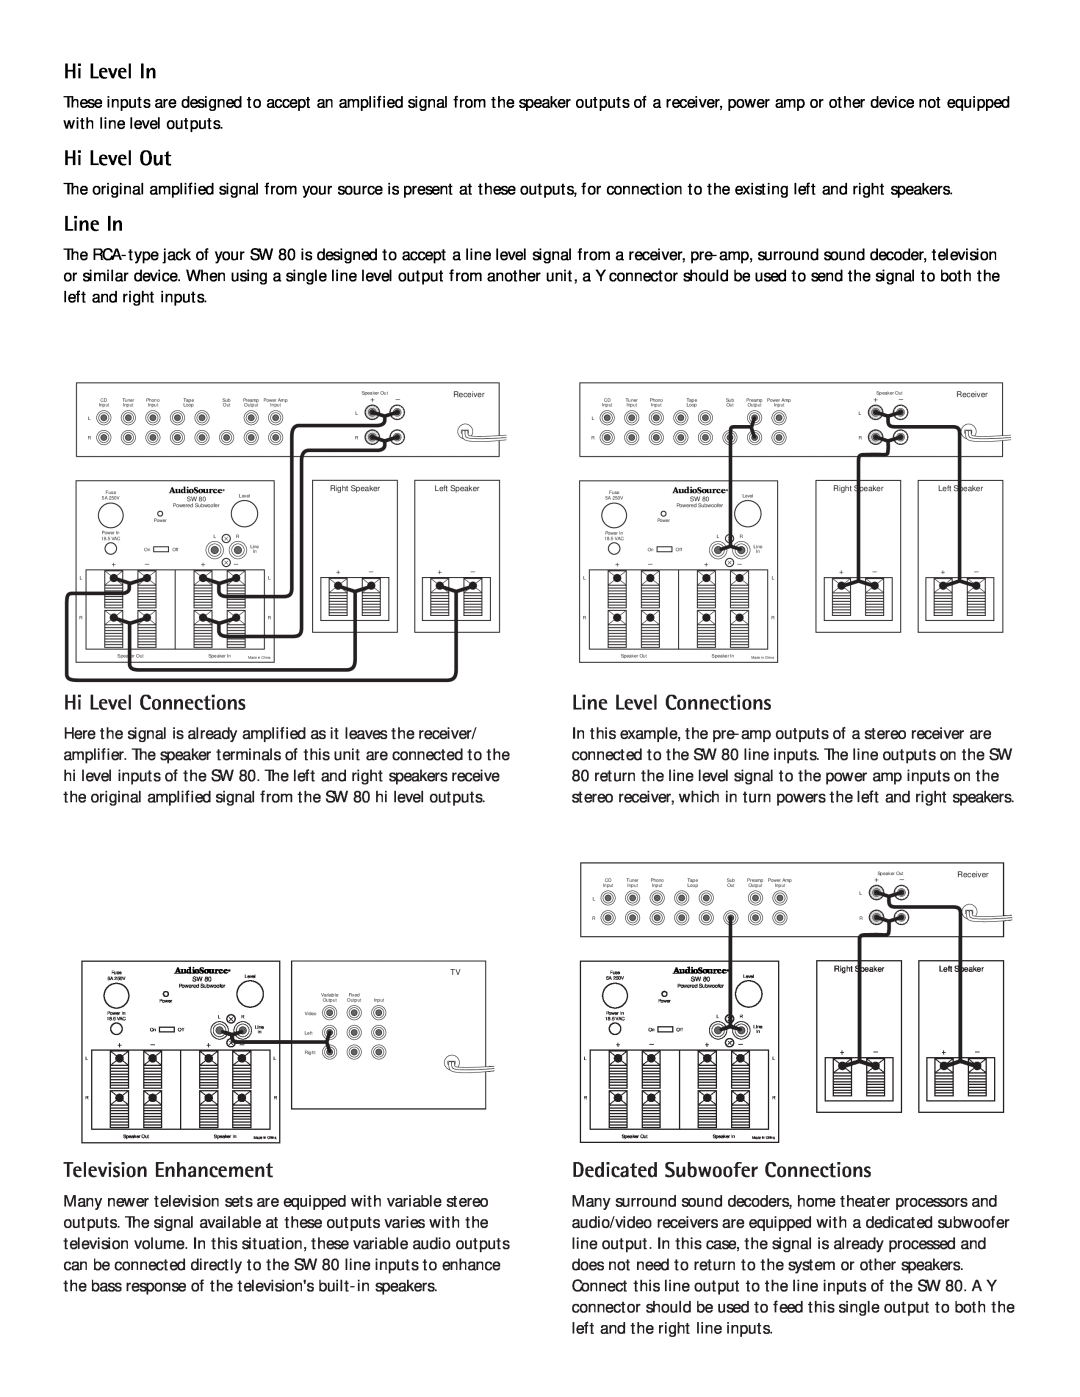 AudioSource System 2.5 owner manual Hi Level In, Hi Level Out, Line In, Hi Level Connections, Line Level Connections 